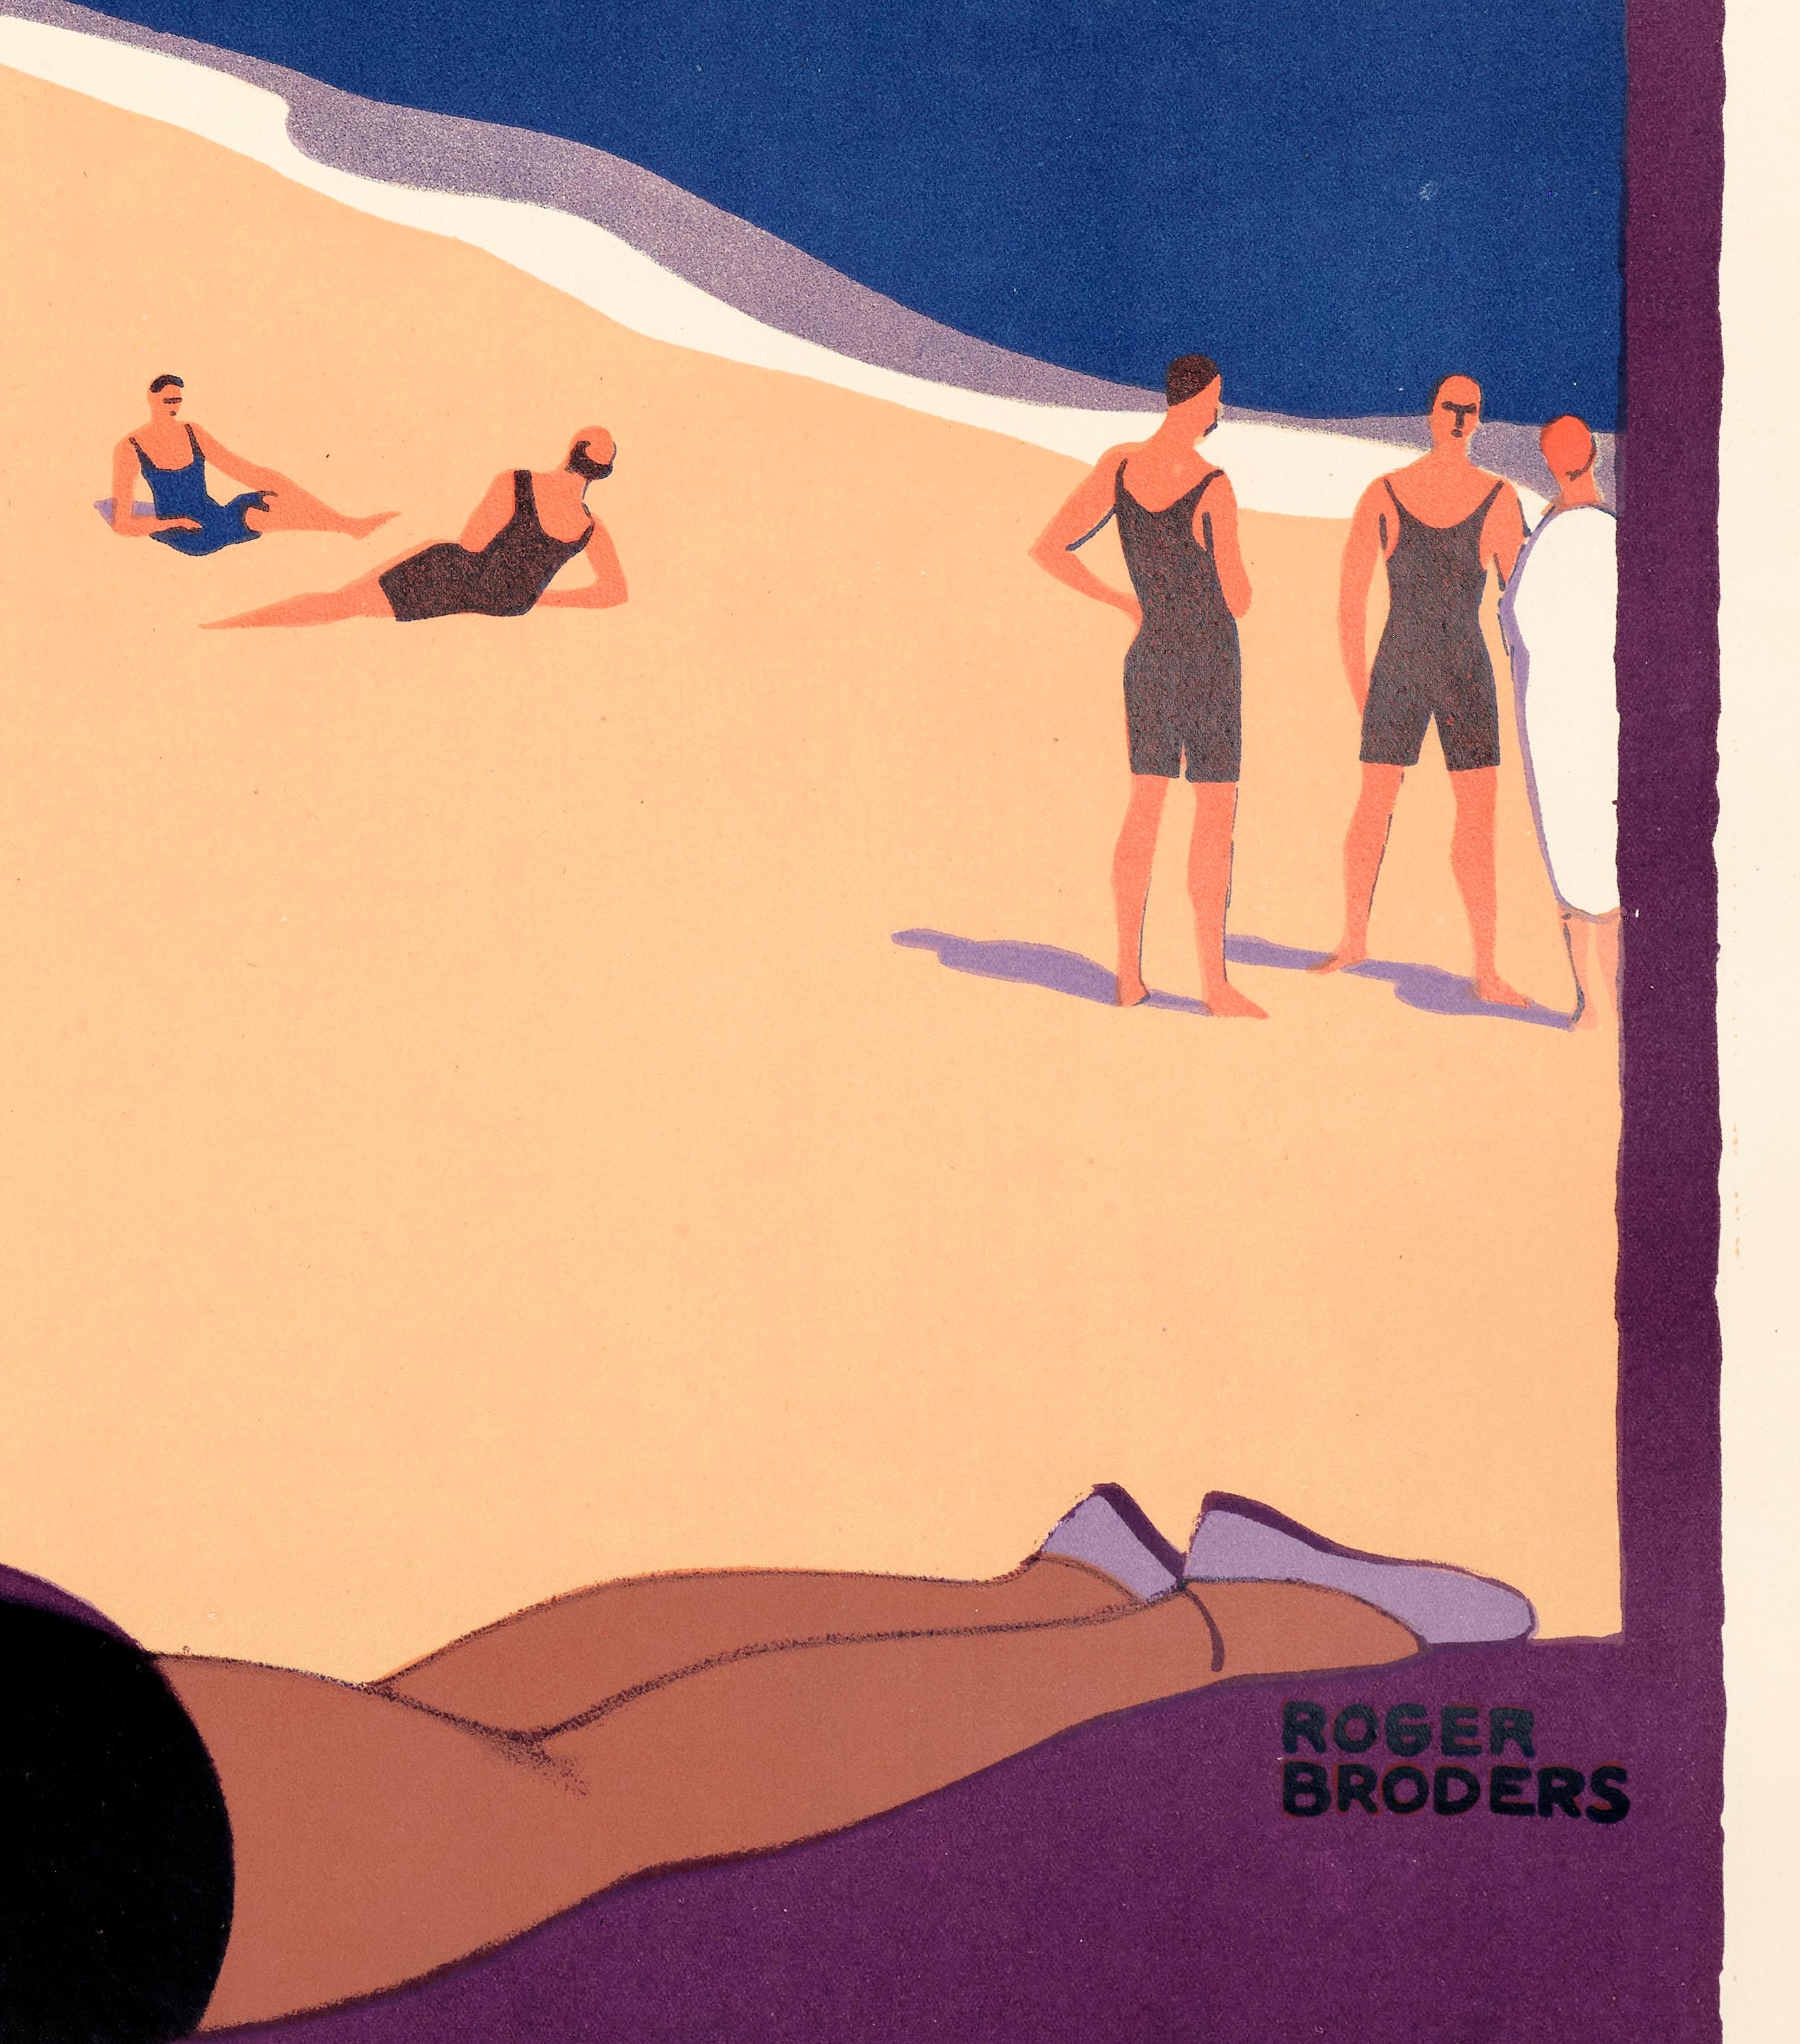 Early 20th Century Broders, Original Art Deco Poster, Antibes, French Riviera, Beach, PLM, 1928